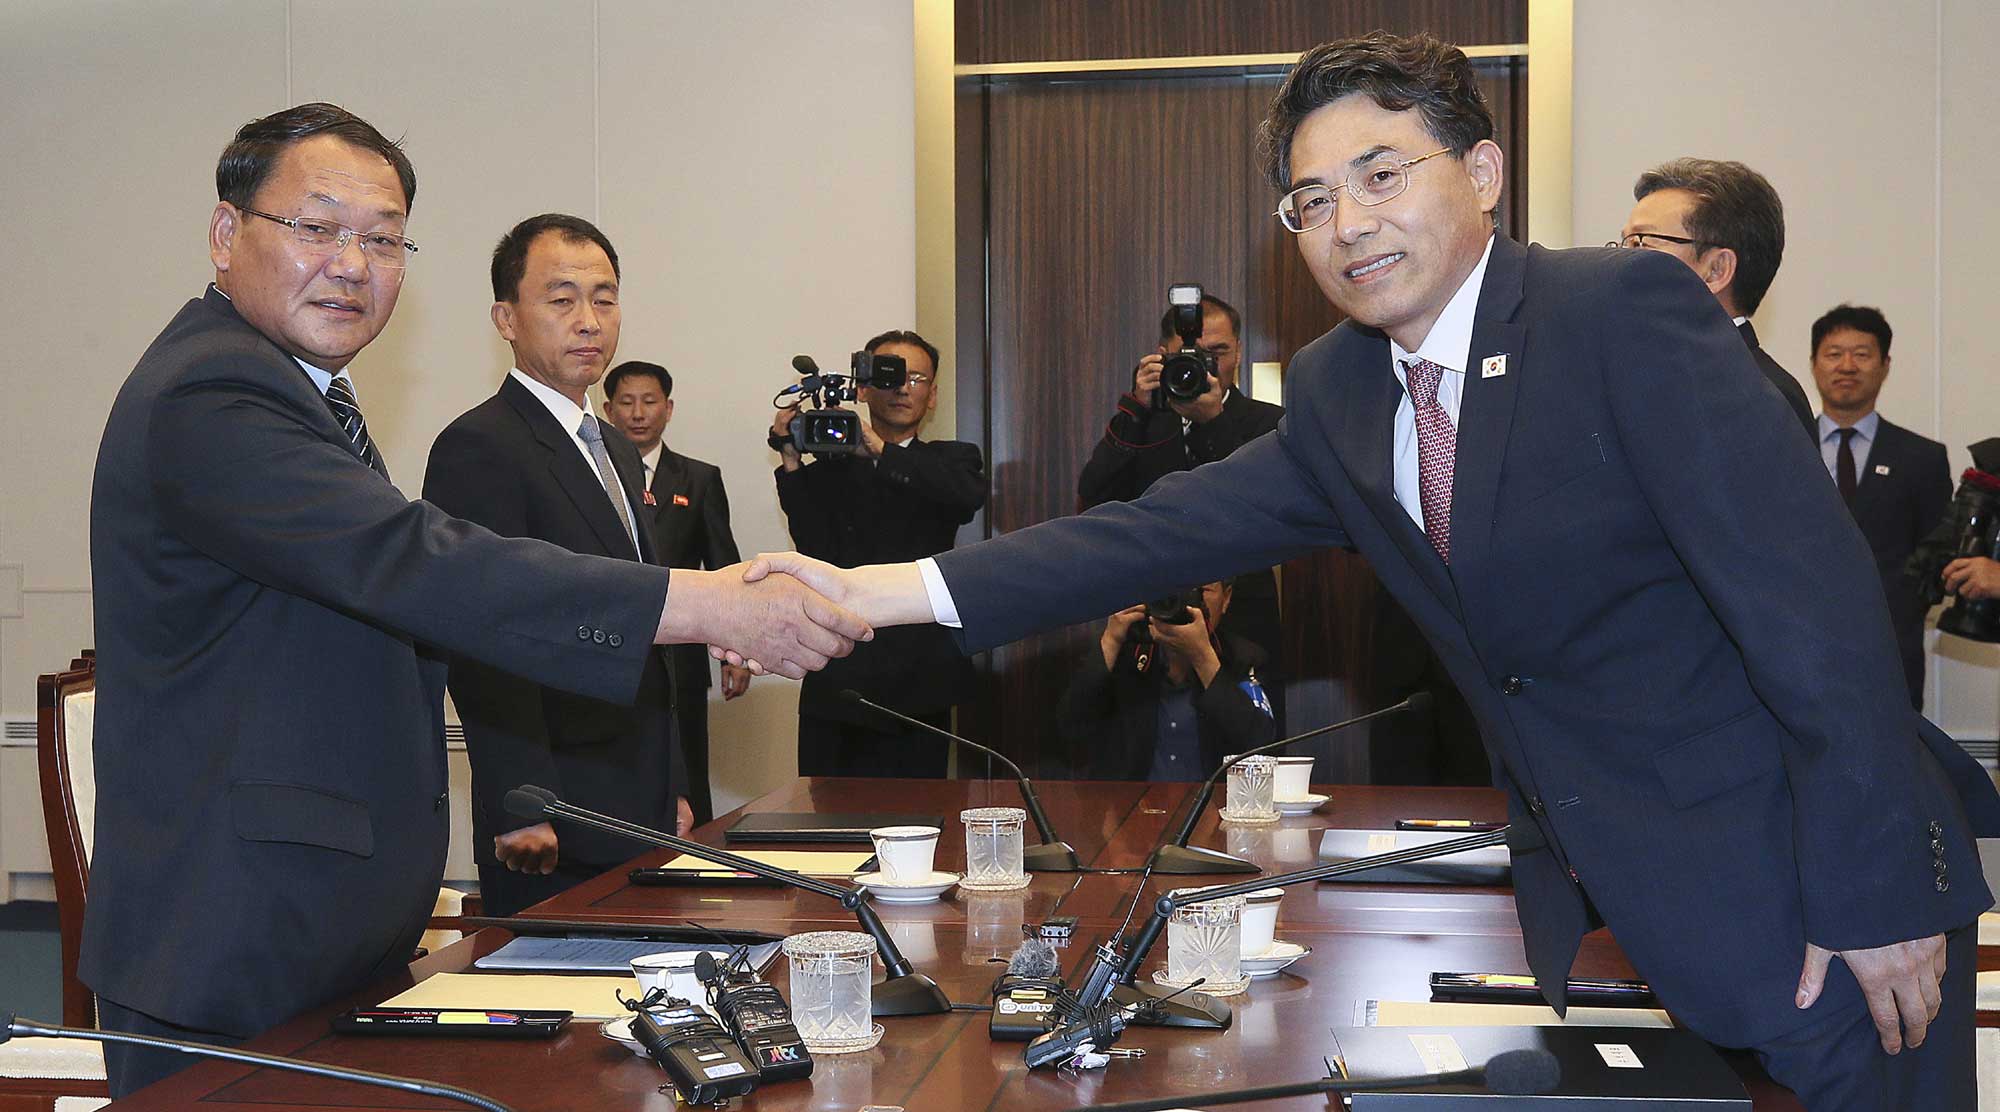 DPRK vice Railroad Minister Kim Yun Hyok, left, shakes hands with his South Korean counterpart vice Transport Minister Kim Jeong-ryeol during a meeting to discuss over inter-Korean cooperation in railway inside the Peace House at the border village of Panmunjom, South Korea, Tuesday, June 26, 2018. [Photo: Korea Pool via AP]